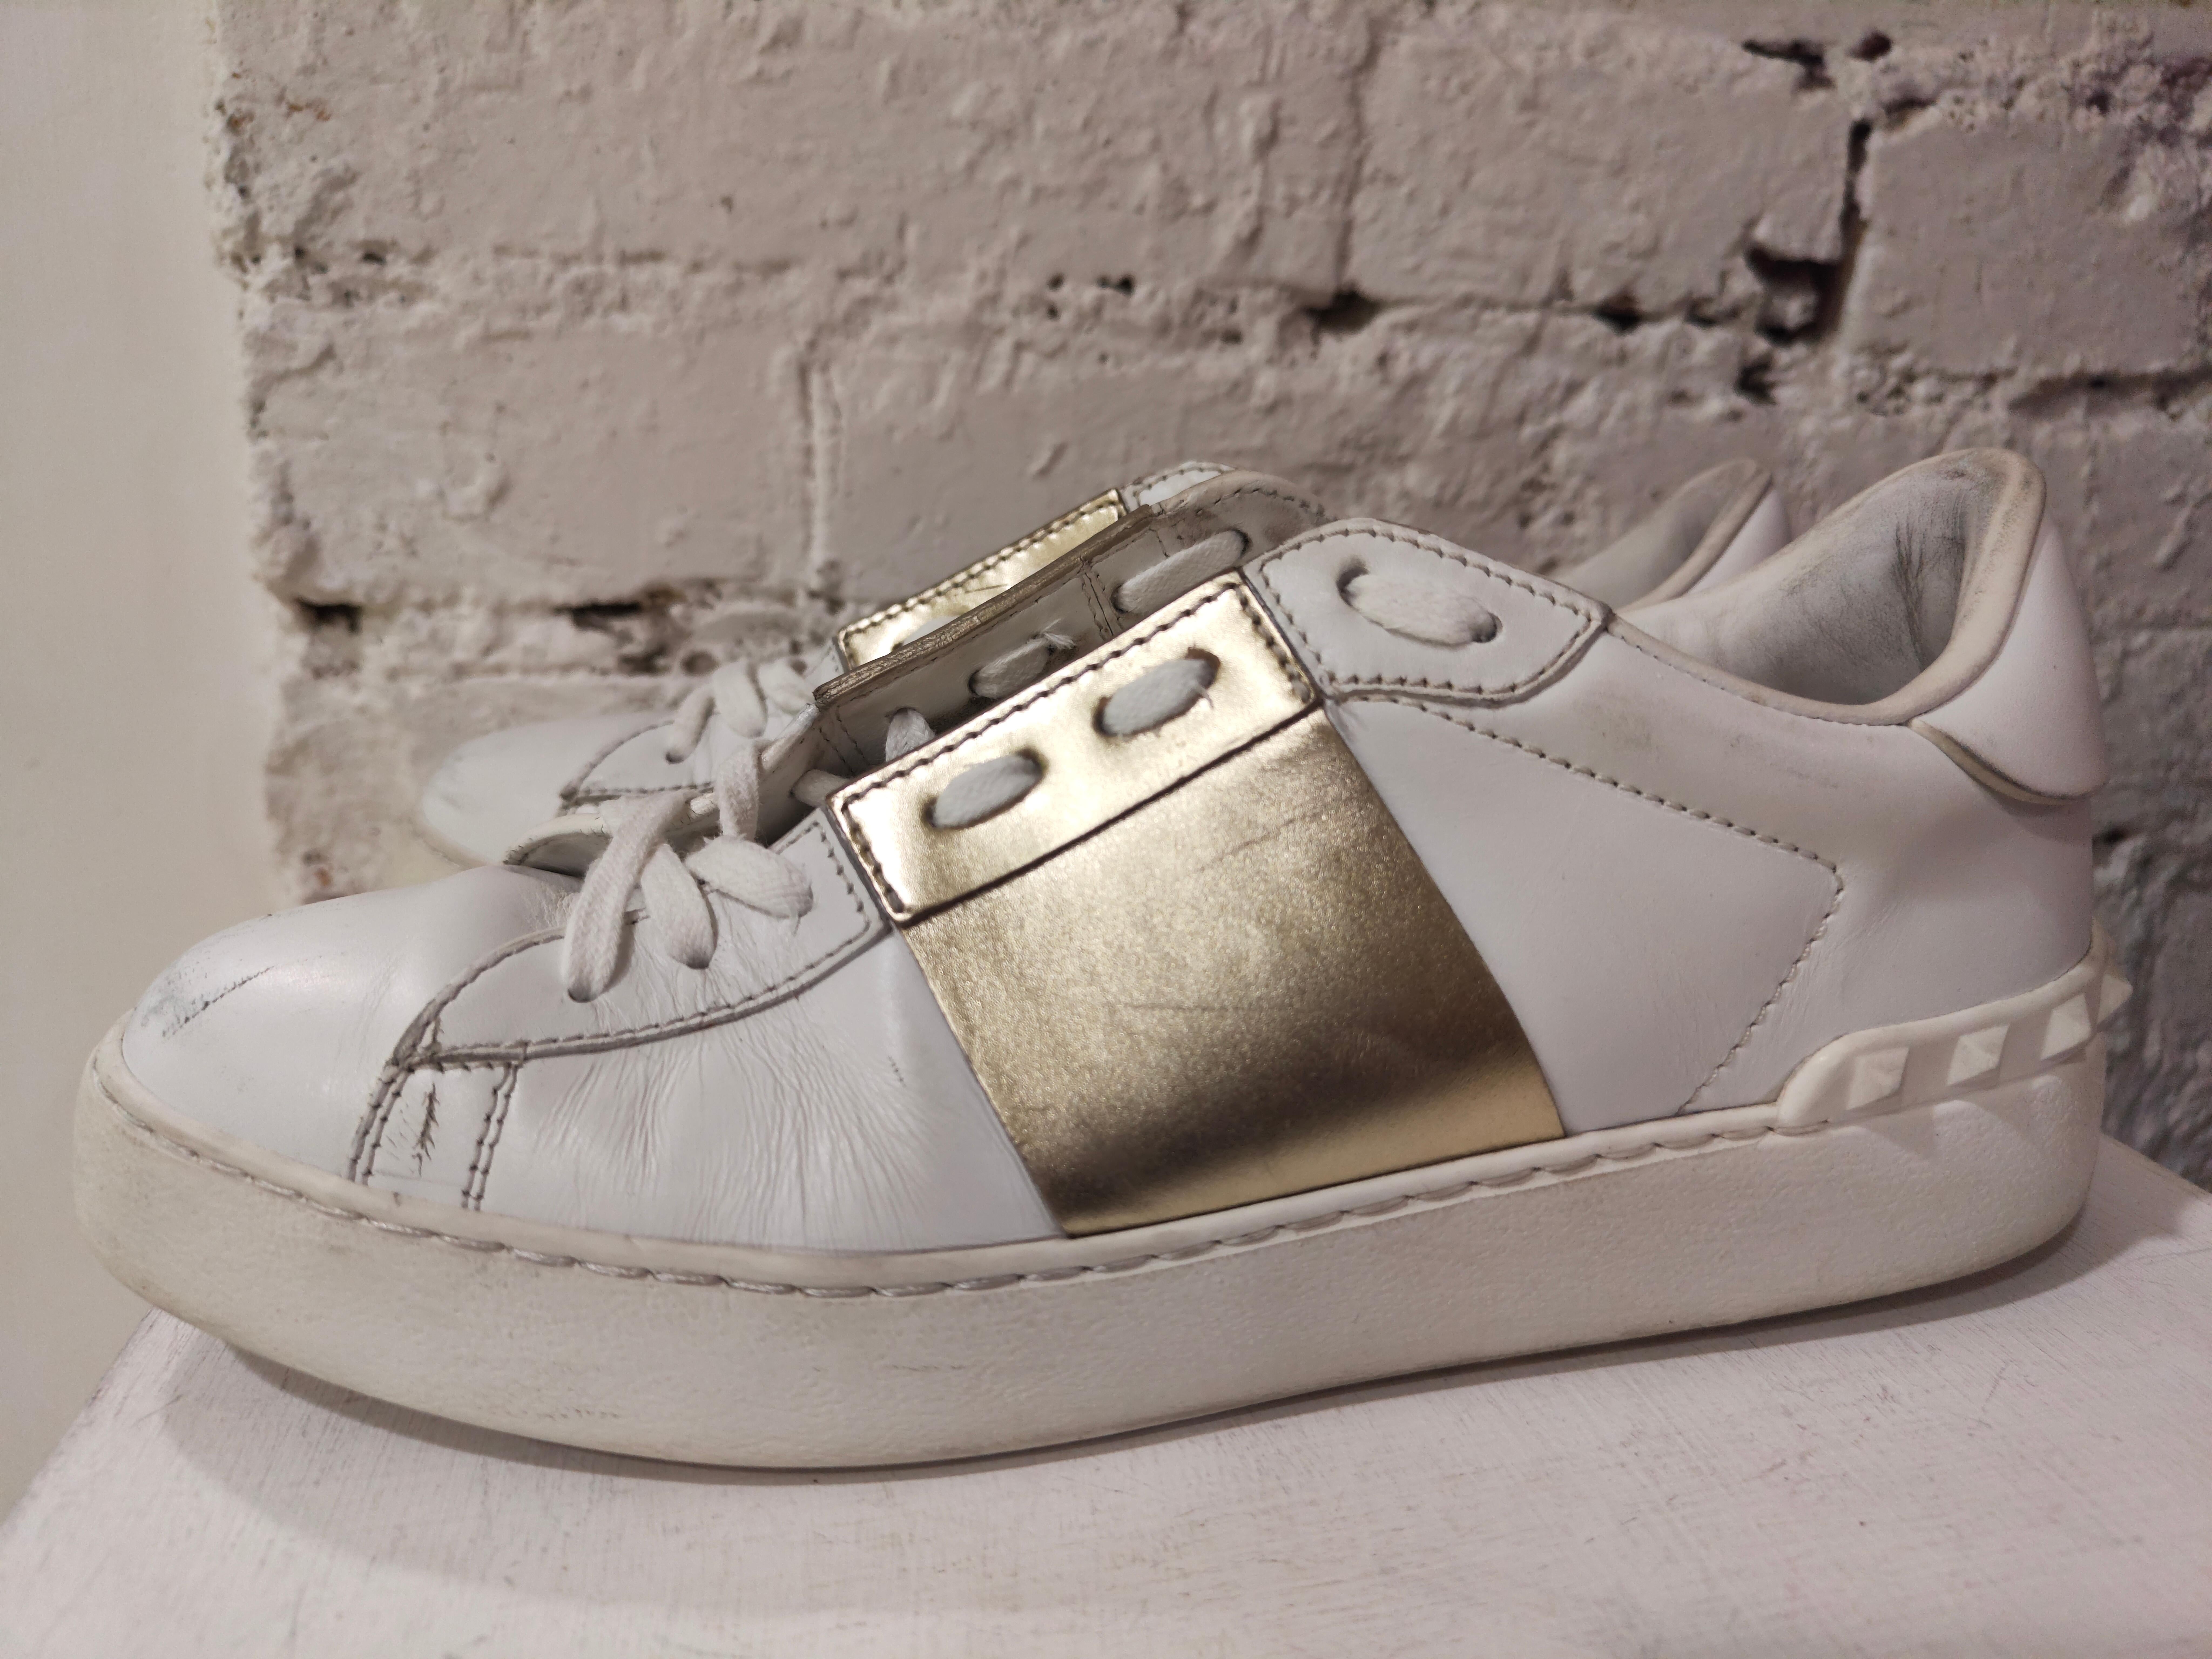 Valentino Garavani white and gold leather studs sneakers
totally made in italy in size 39